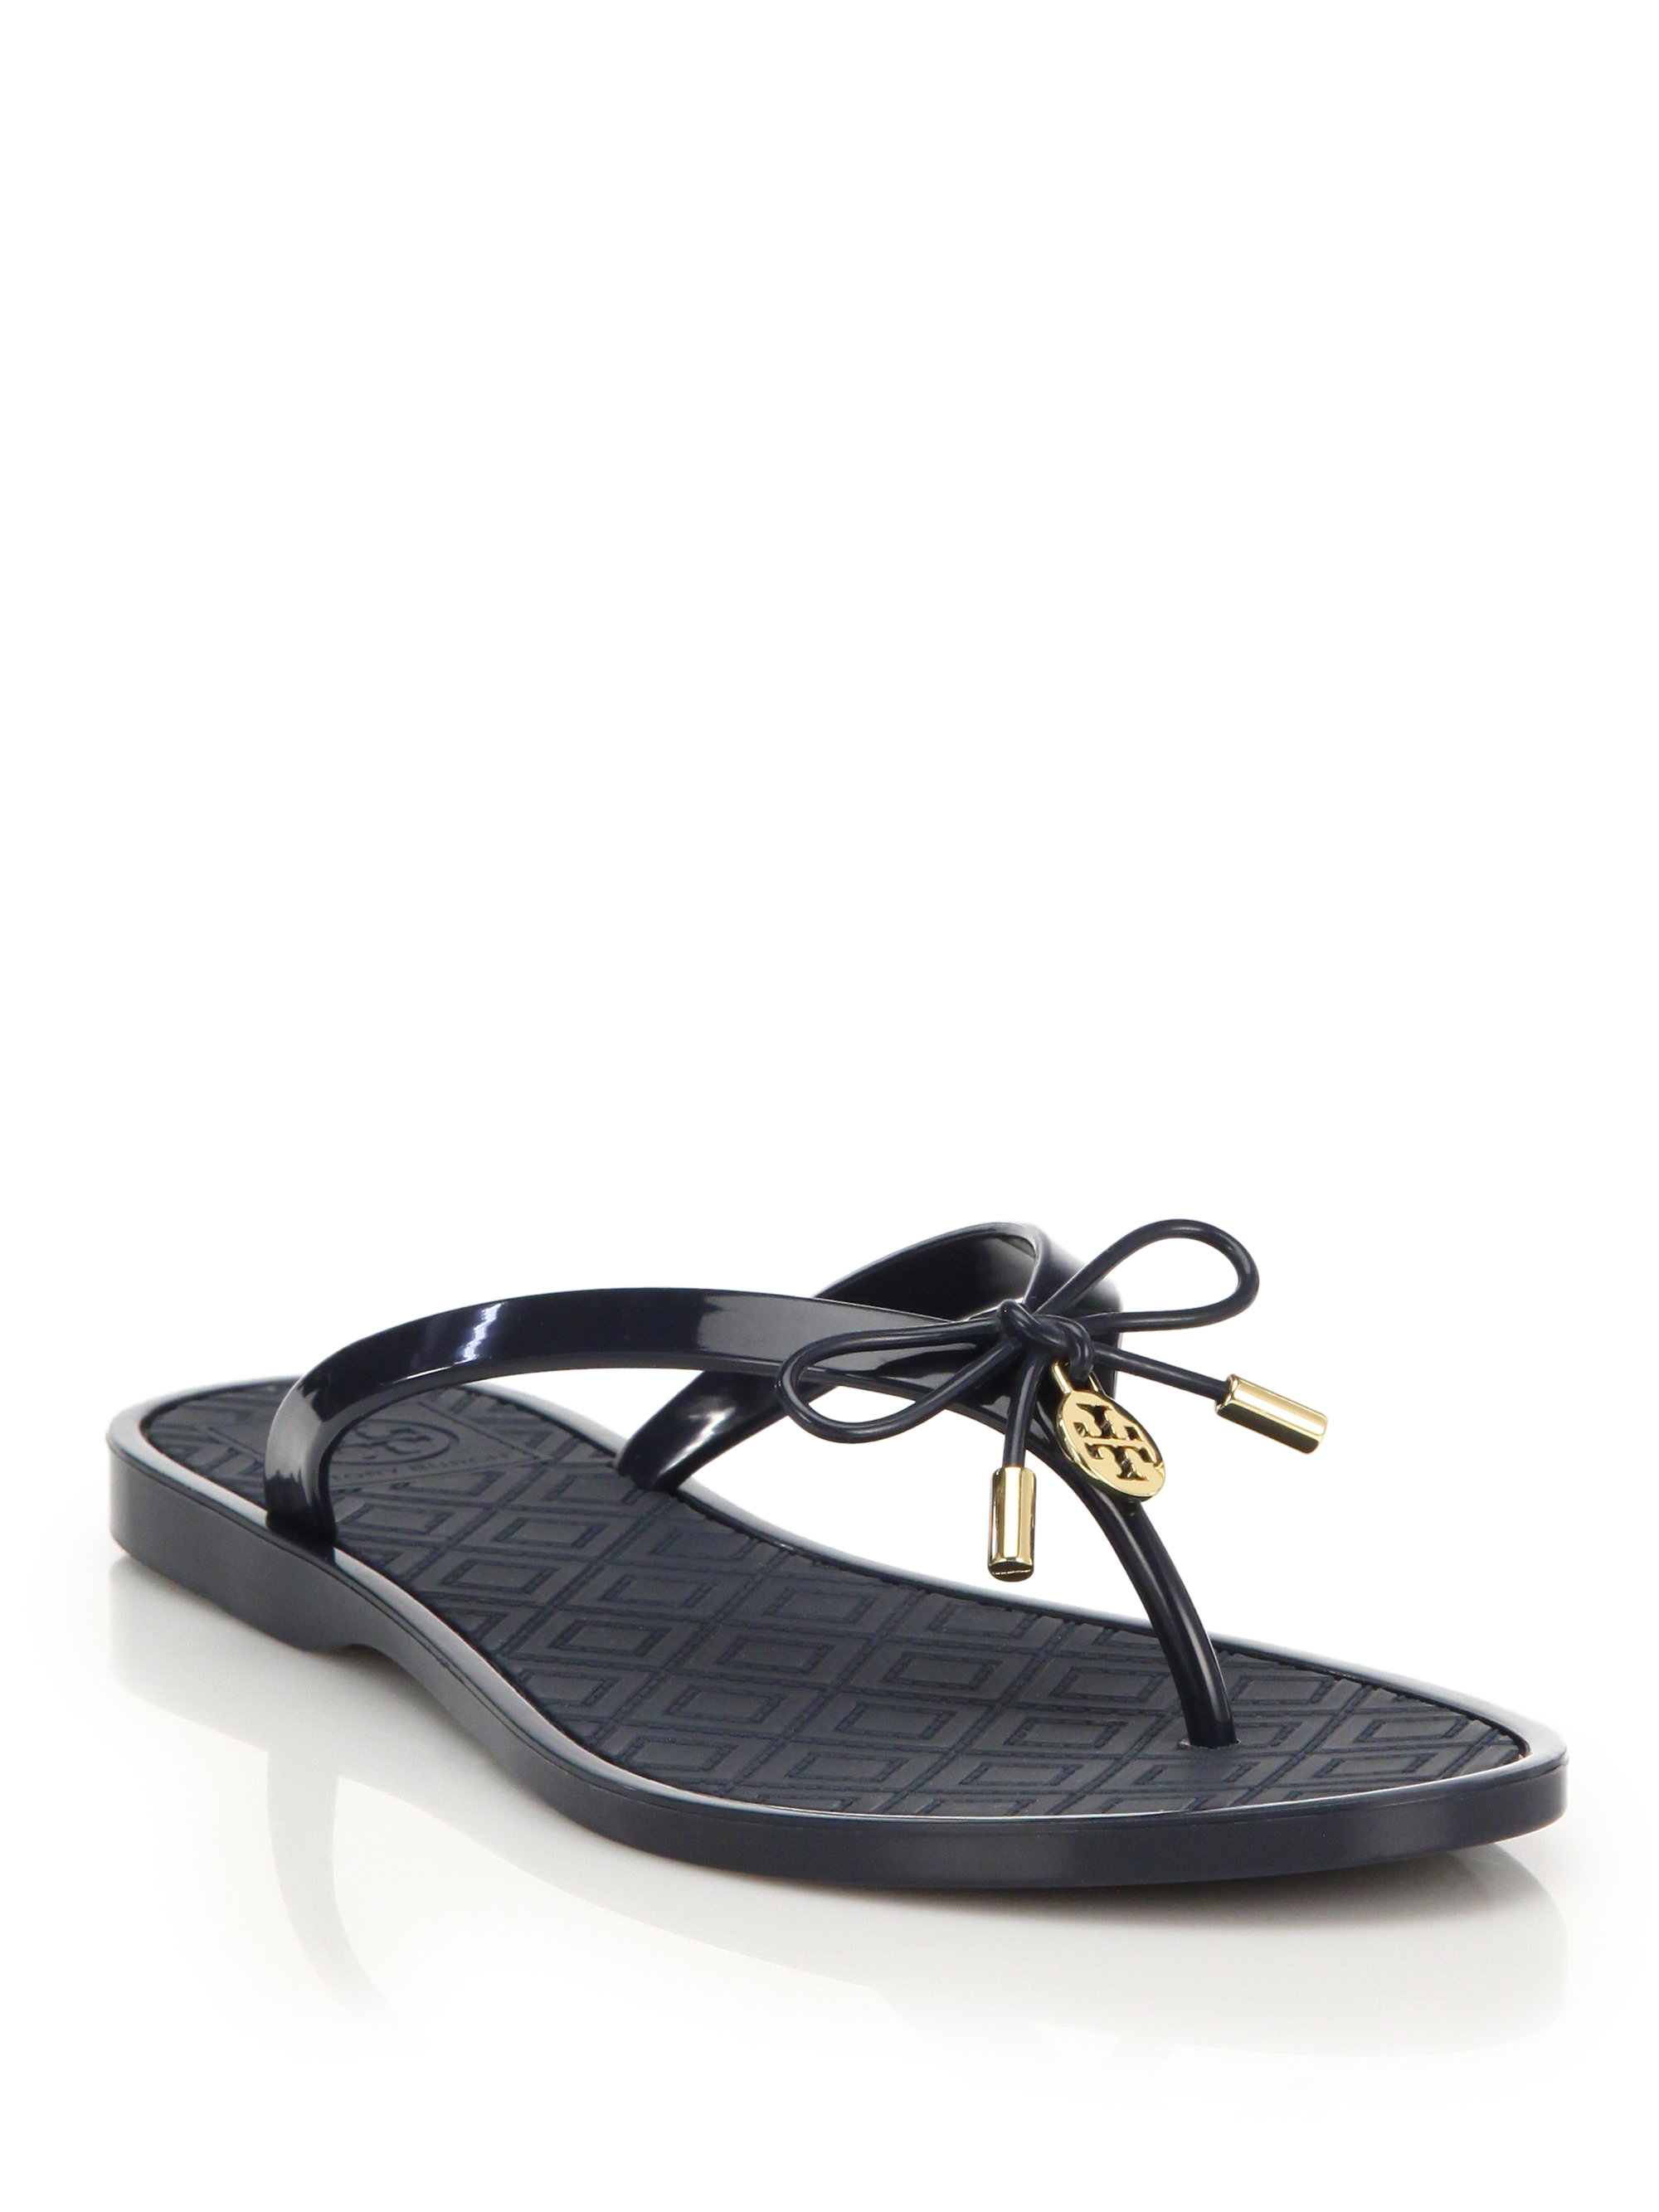 Tory Burch Jelly Bow Thong Sandals in Navy (Blue) - Lyst